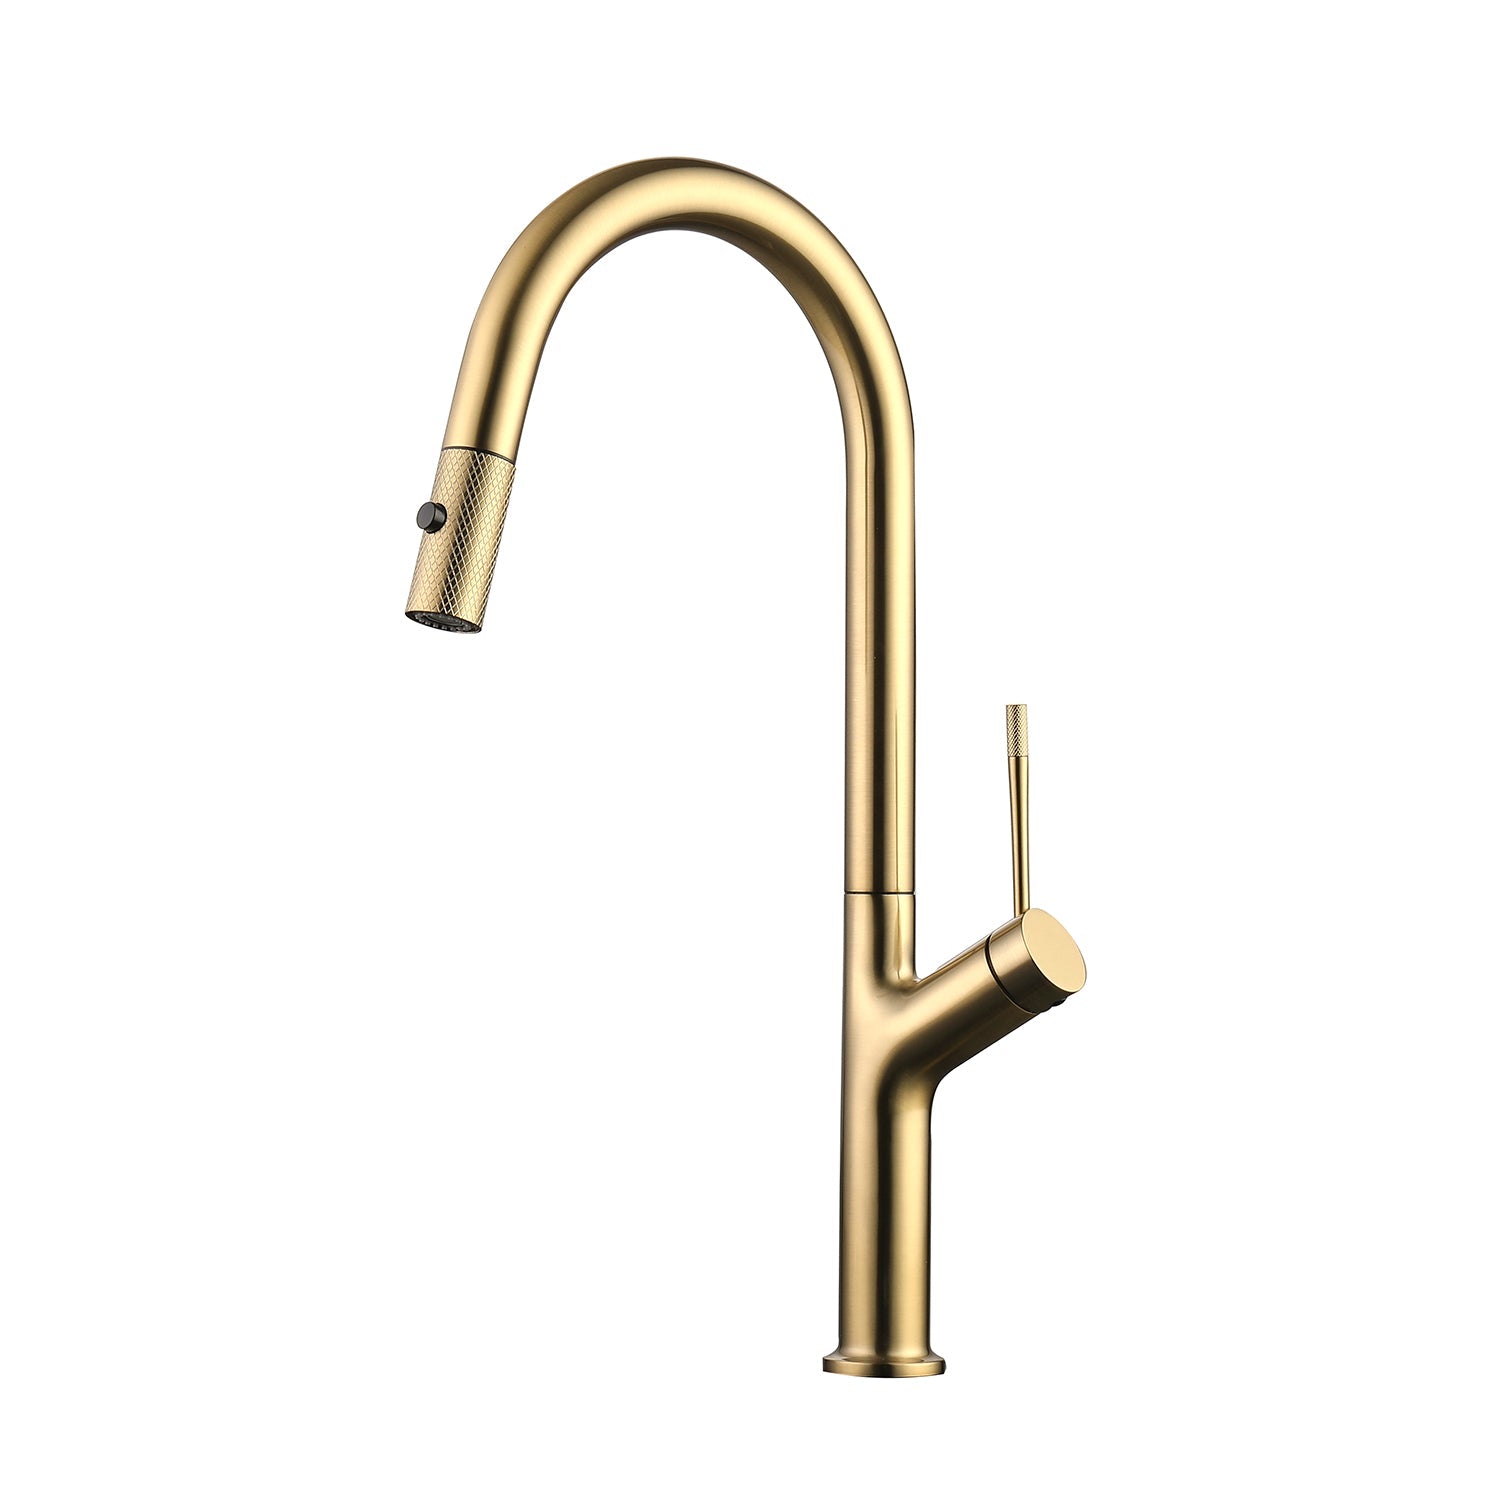 DAX Single Handle Pull Out Kitchen Faucet (DAX-8020011)